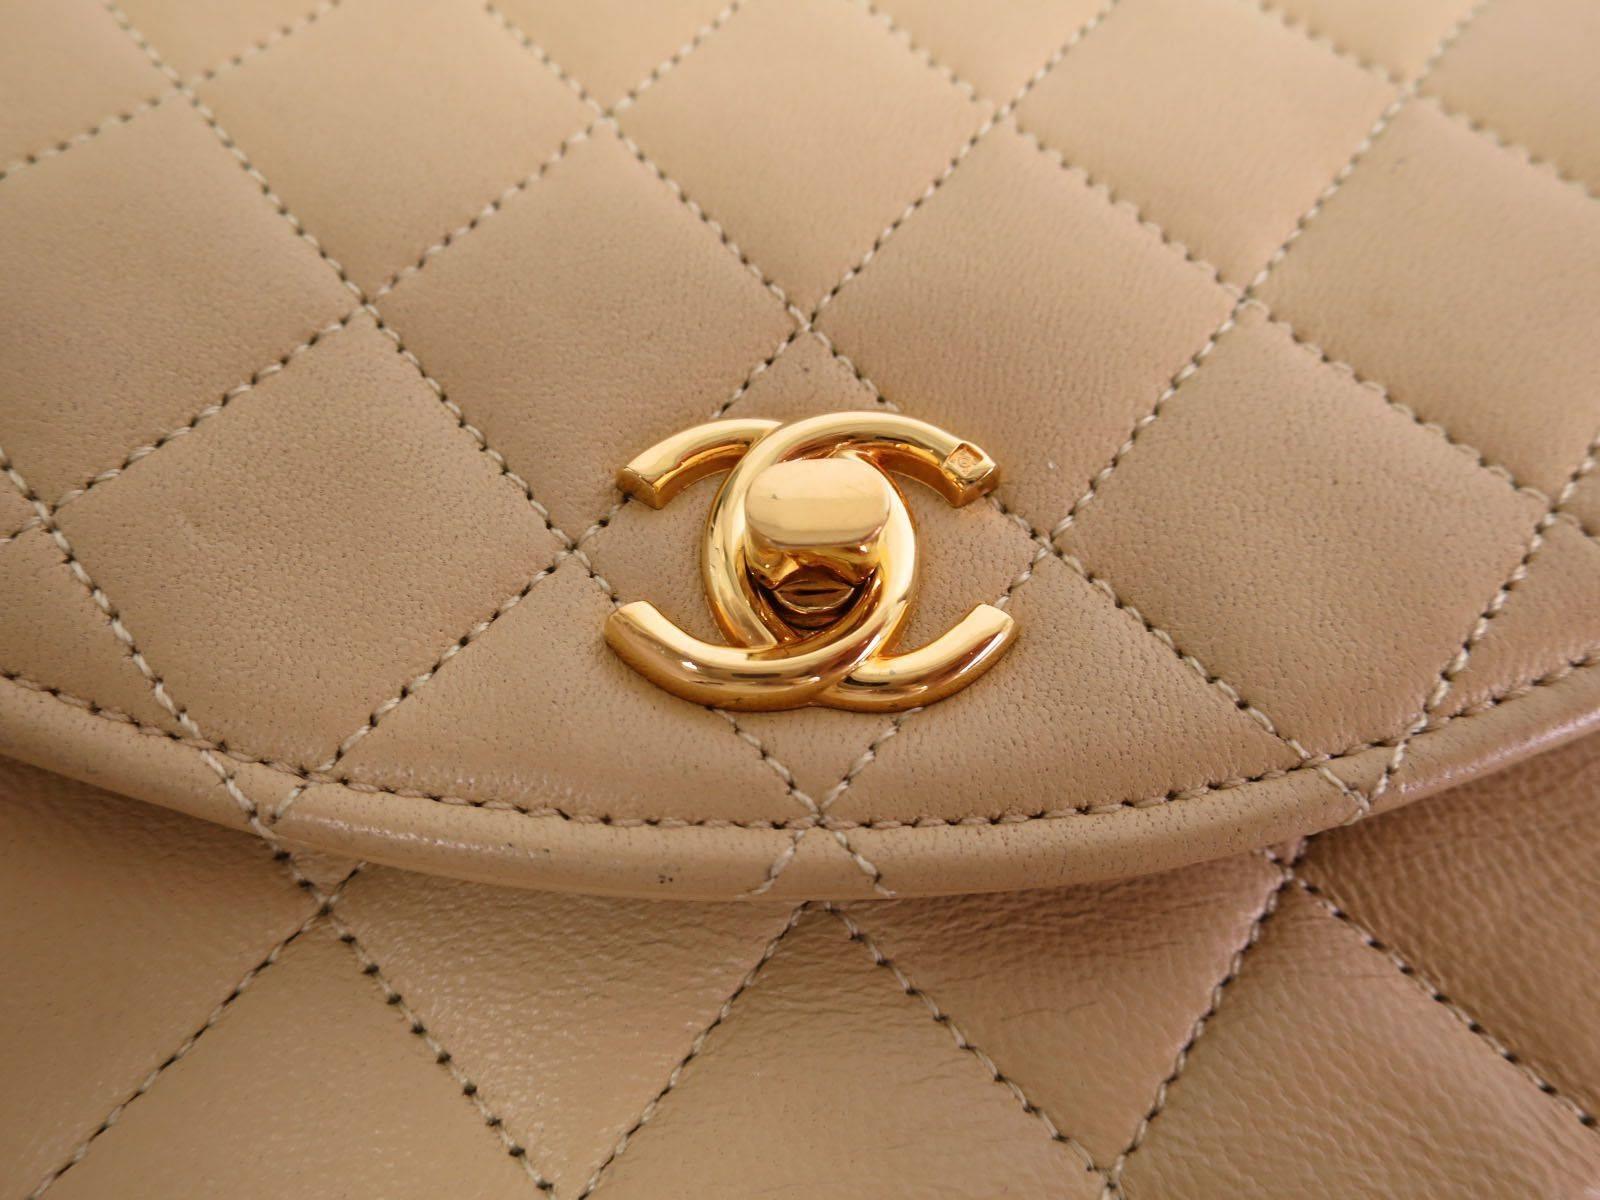 CURATOR'S NOTES

Say hello to your new favorite grab-and-go Chanel bag!  Chic beige calfskin leather Chanel flap featuring gold hardware and signature interlocking CC's at the closure. 

Style Tip: Dangle it from your shoulder or go hands-free